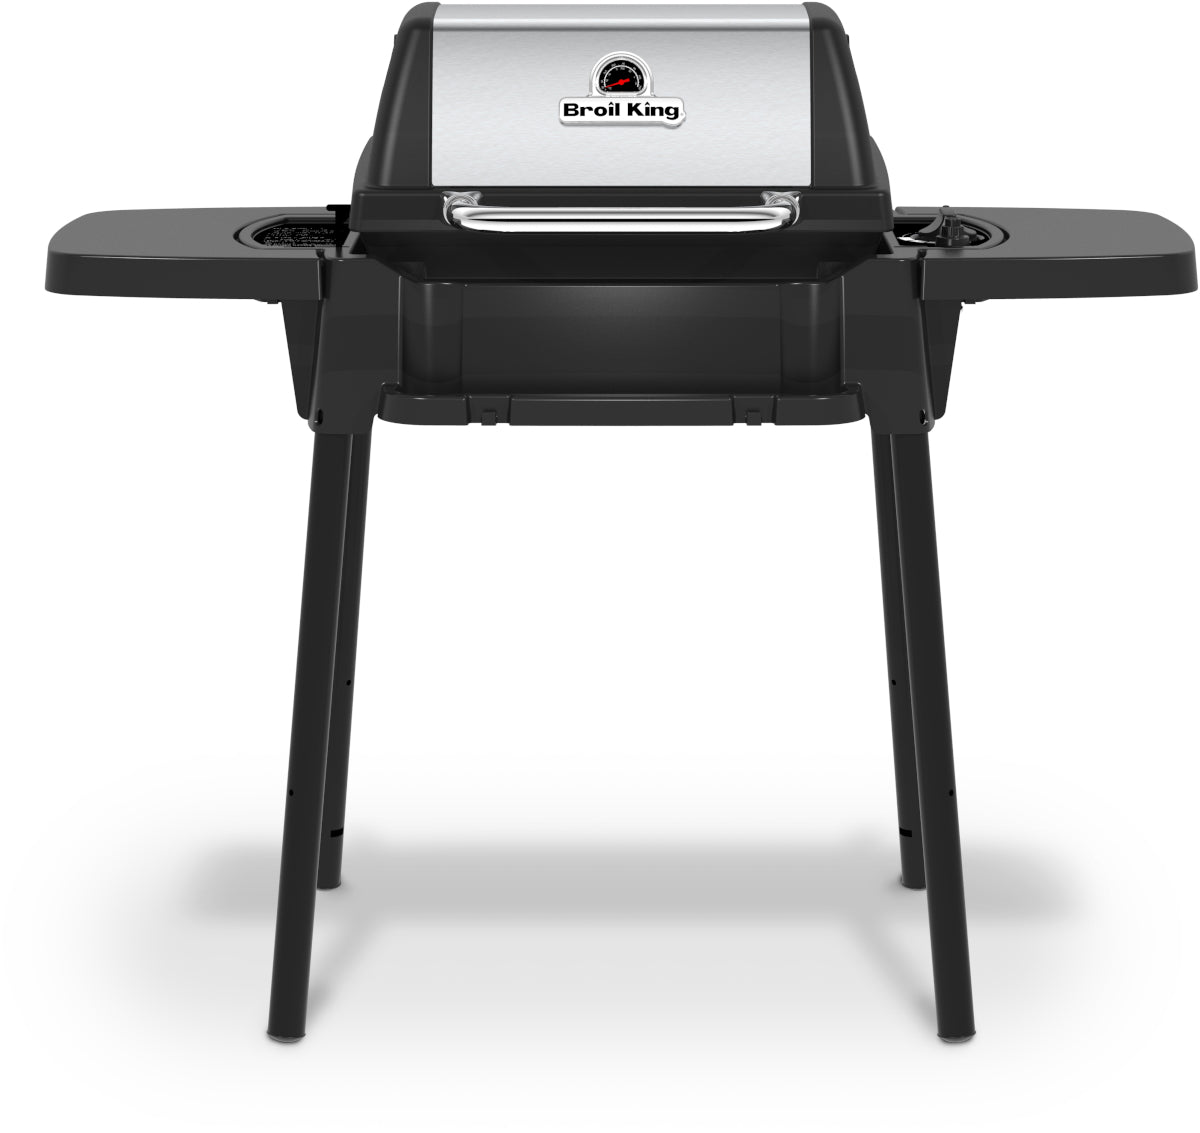 Broil King Porta-Chef 120 (previously known as the Porta-Chef Pro)